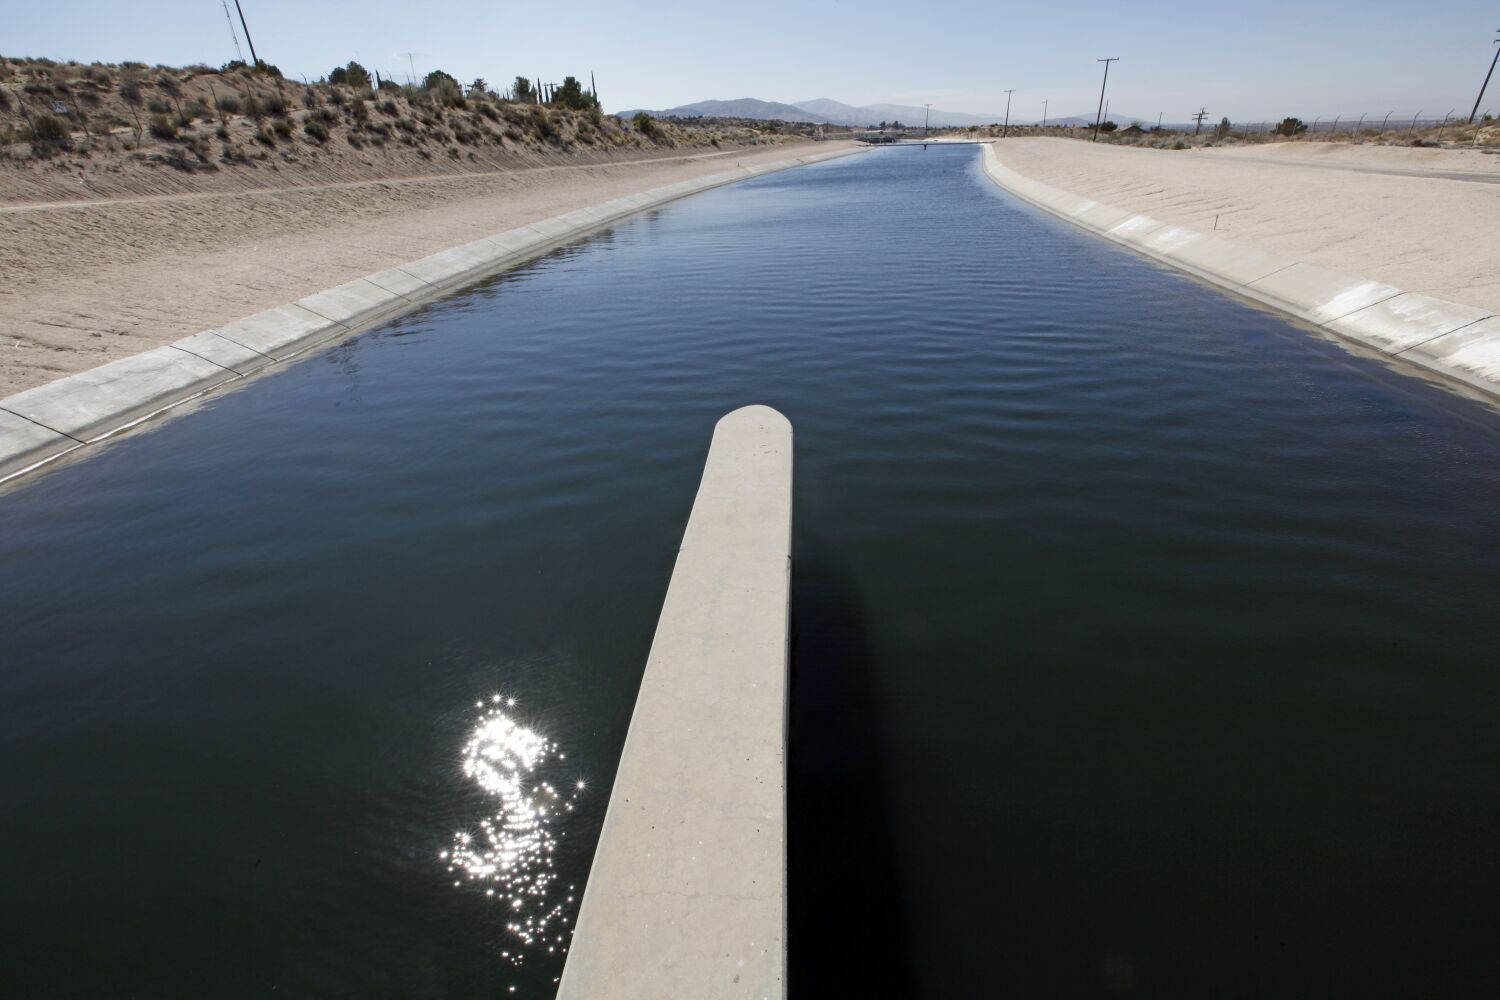 On eve of storms, California water authorities boost State Water Project allocation to 35%